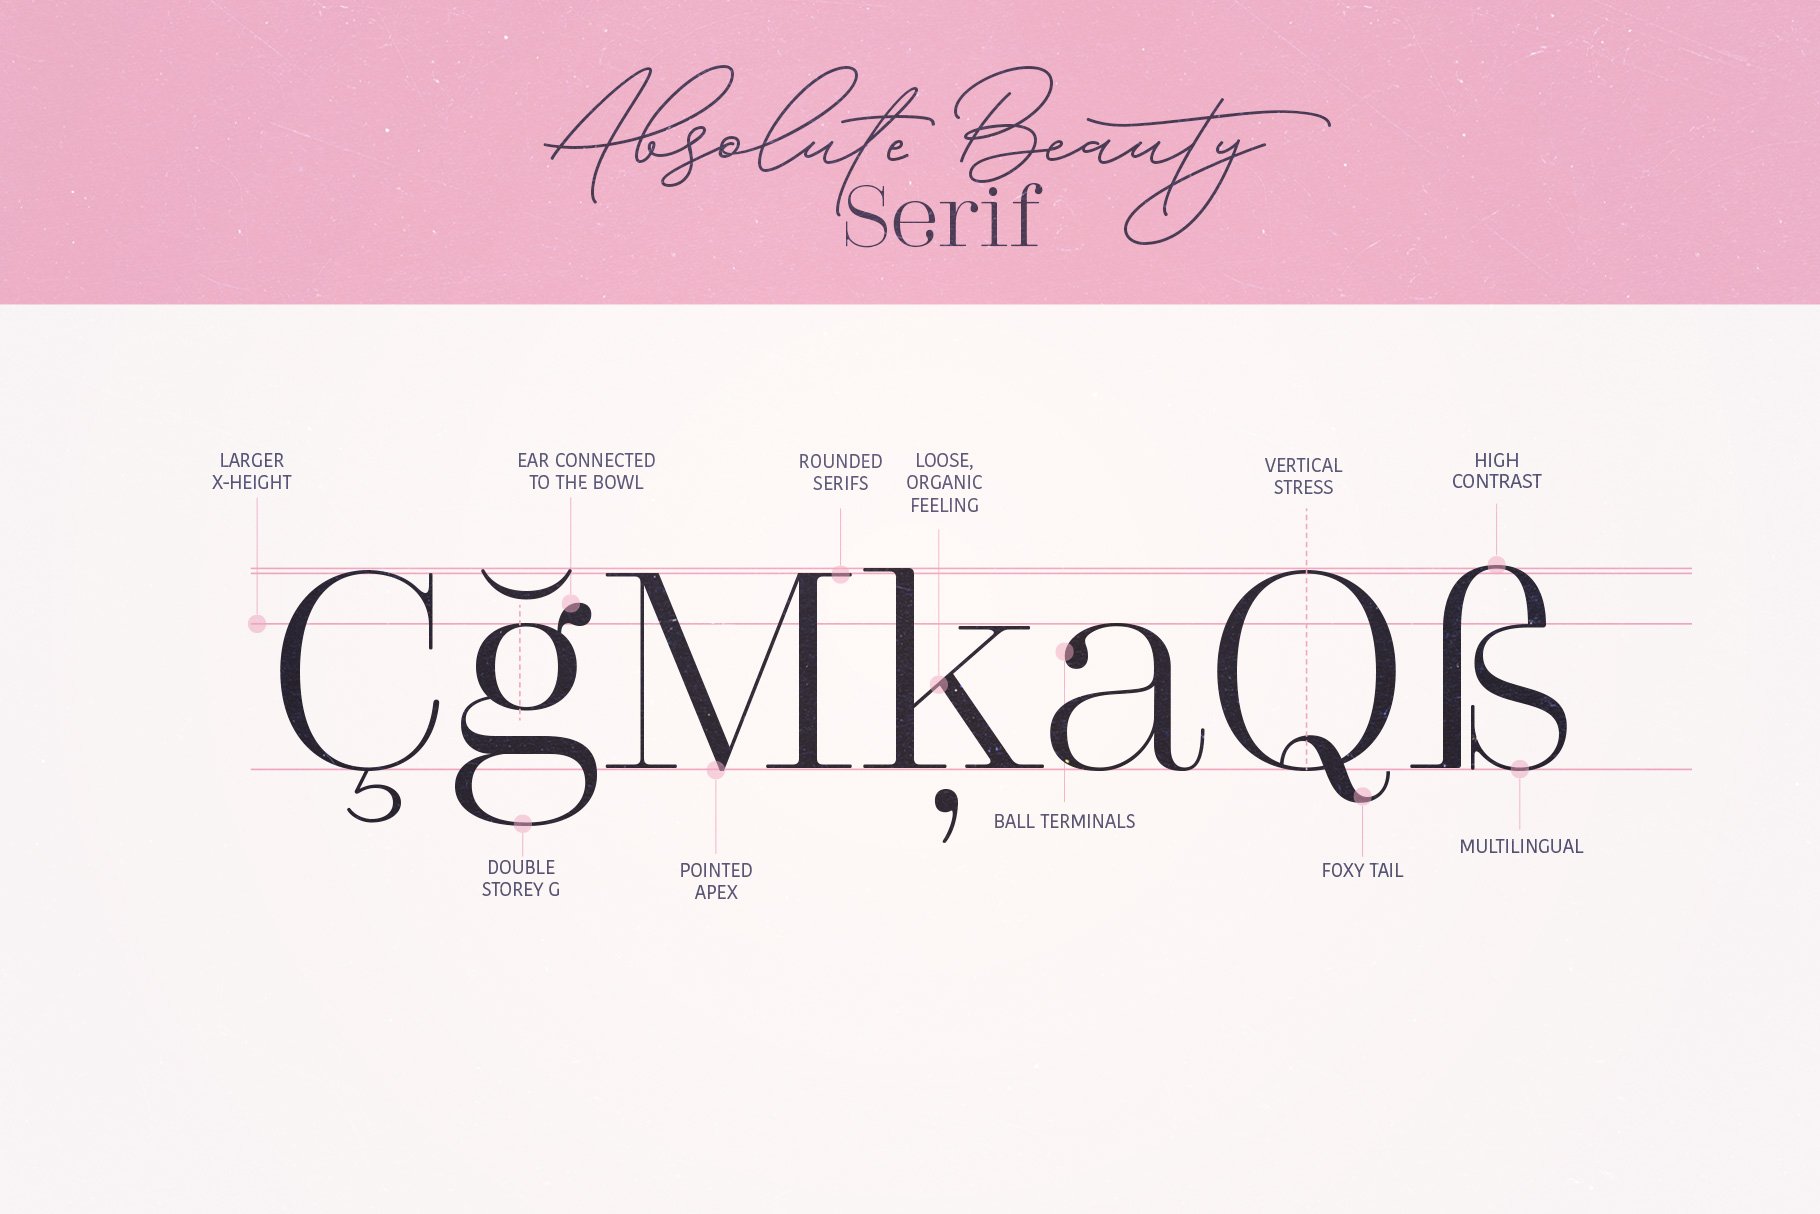 Bundle of 6 Fonts - The Safari Collection by Jackie G